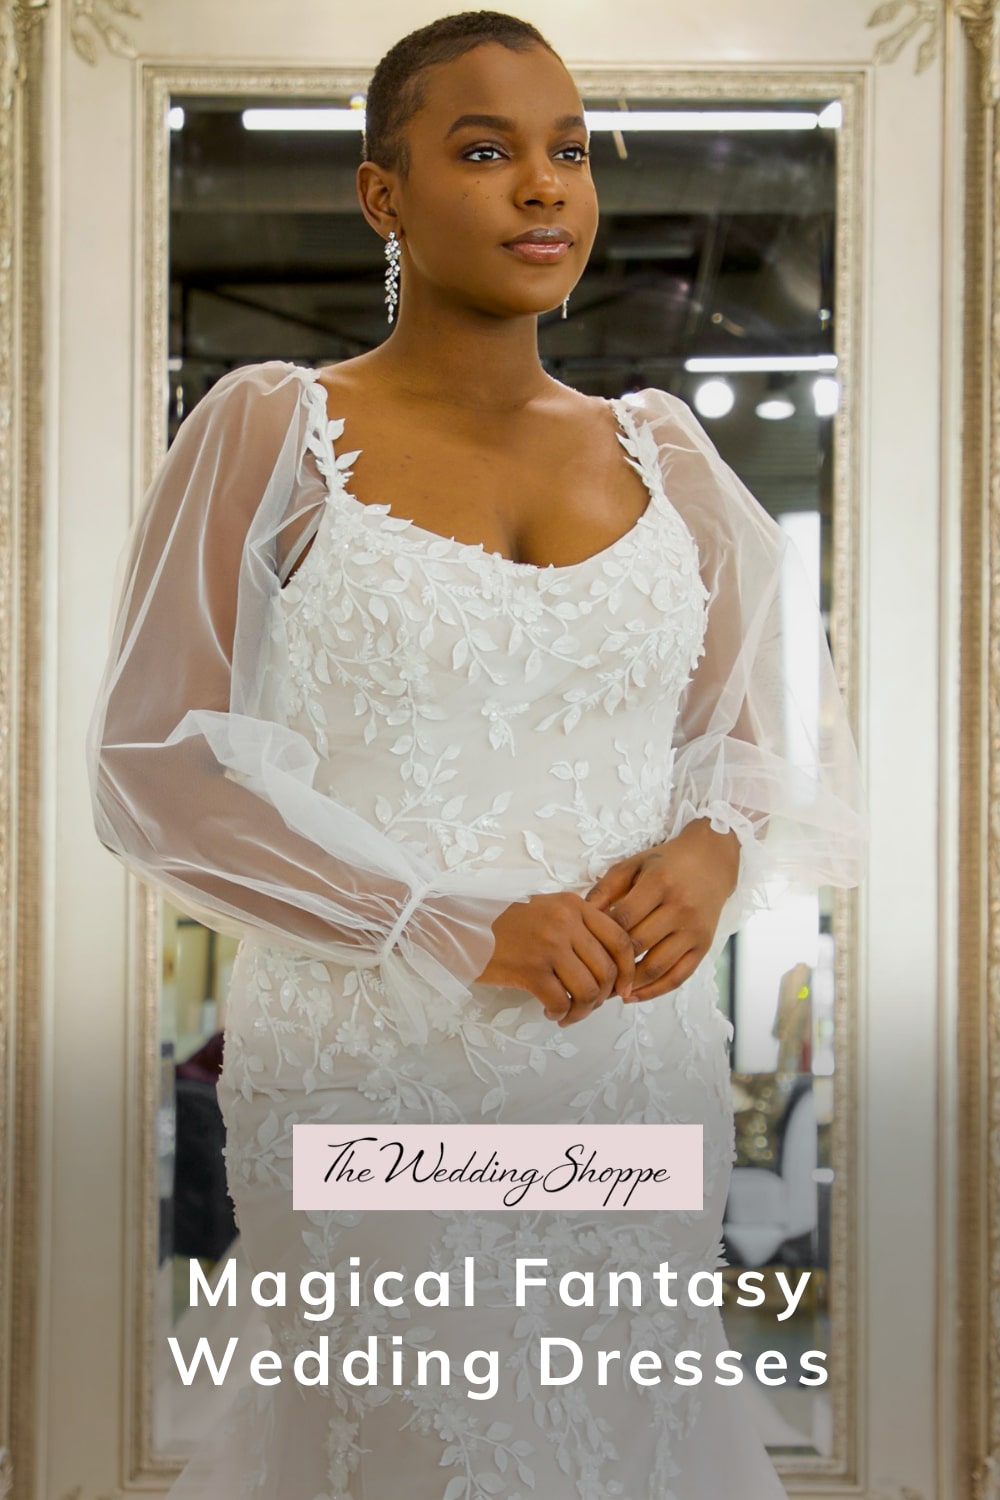 Pinnable graphic for "Magical Fantasy Wedding Dresses" from The Wedding Shoppe